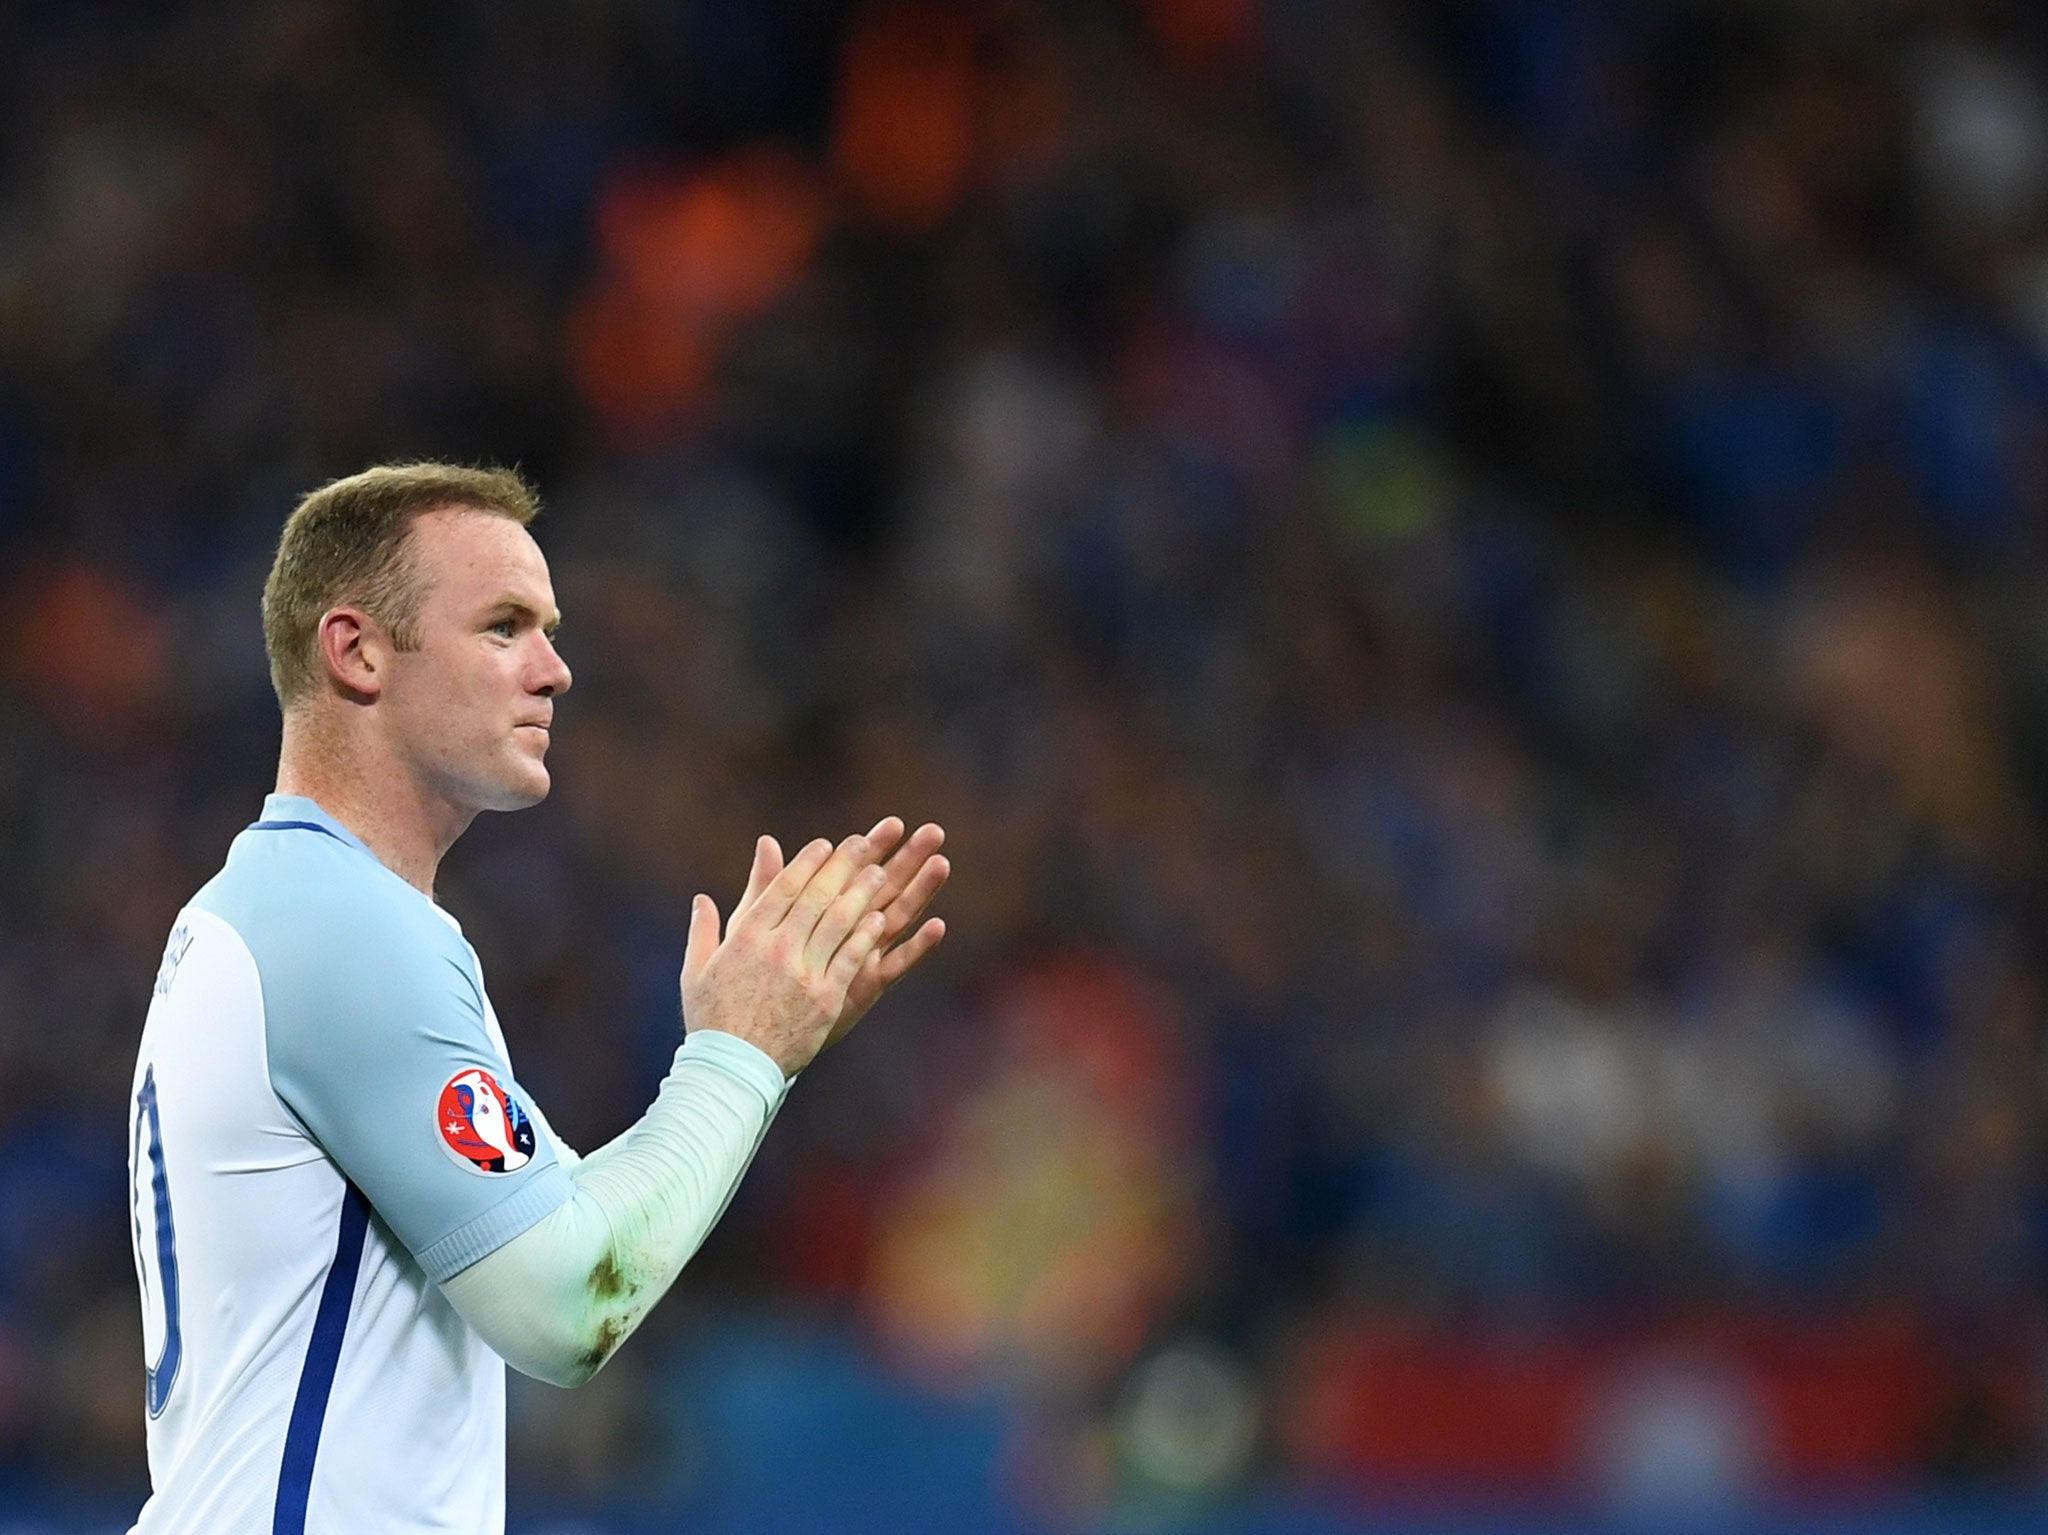 Wayne Rooney will once again lead the England national side